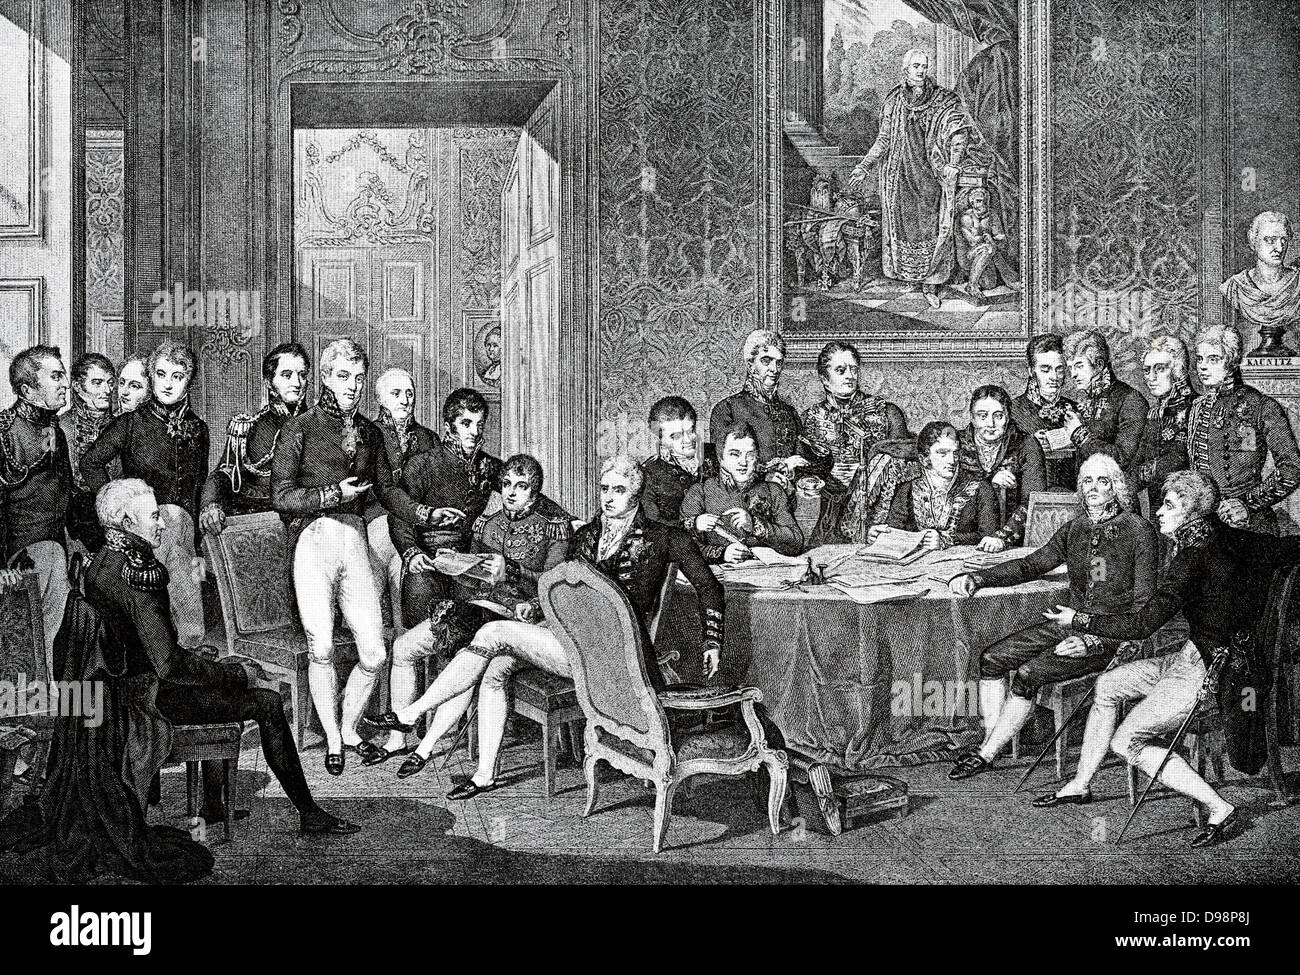 The Vienna Congress (1814-1815) that after the fall of Napoleon negotiated along came the Great Powers negotiated settlement on borders of states which Napoleon had brought such a great change, the decisions taken at this 'congress, for a considerable time in Europe the political verhoudindingen determined. Stock Photo